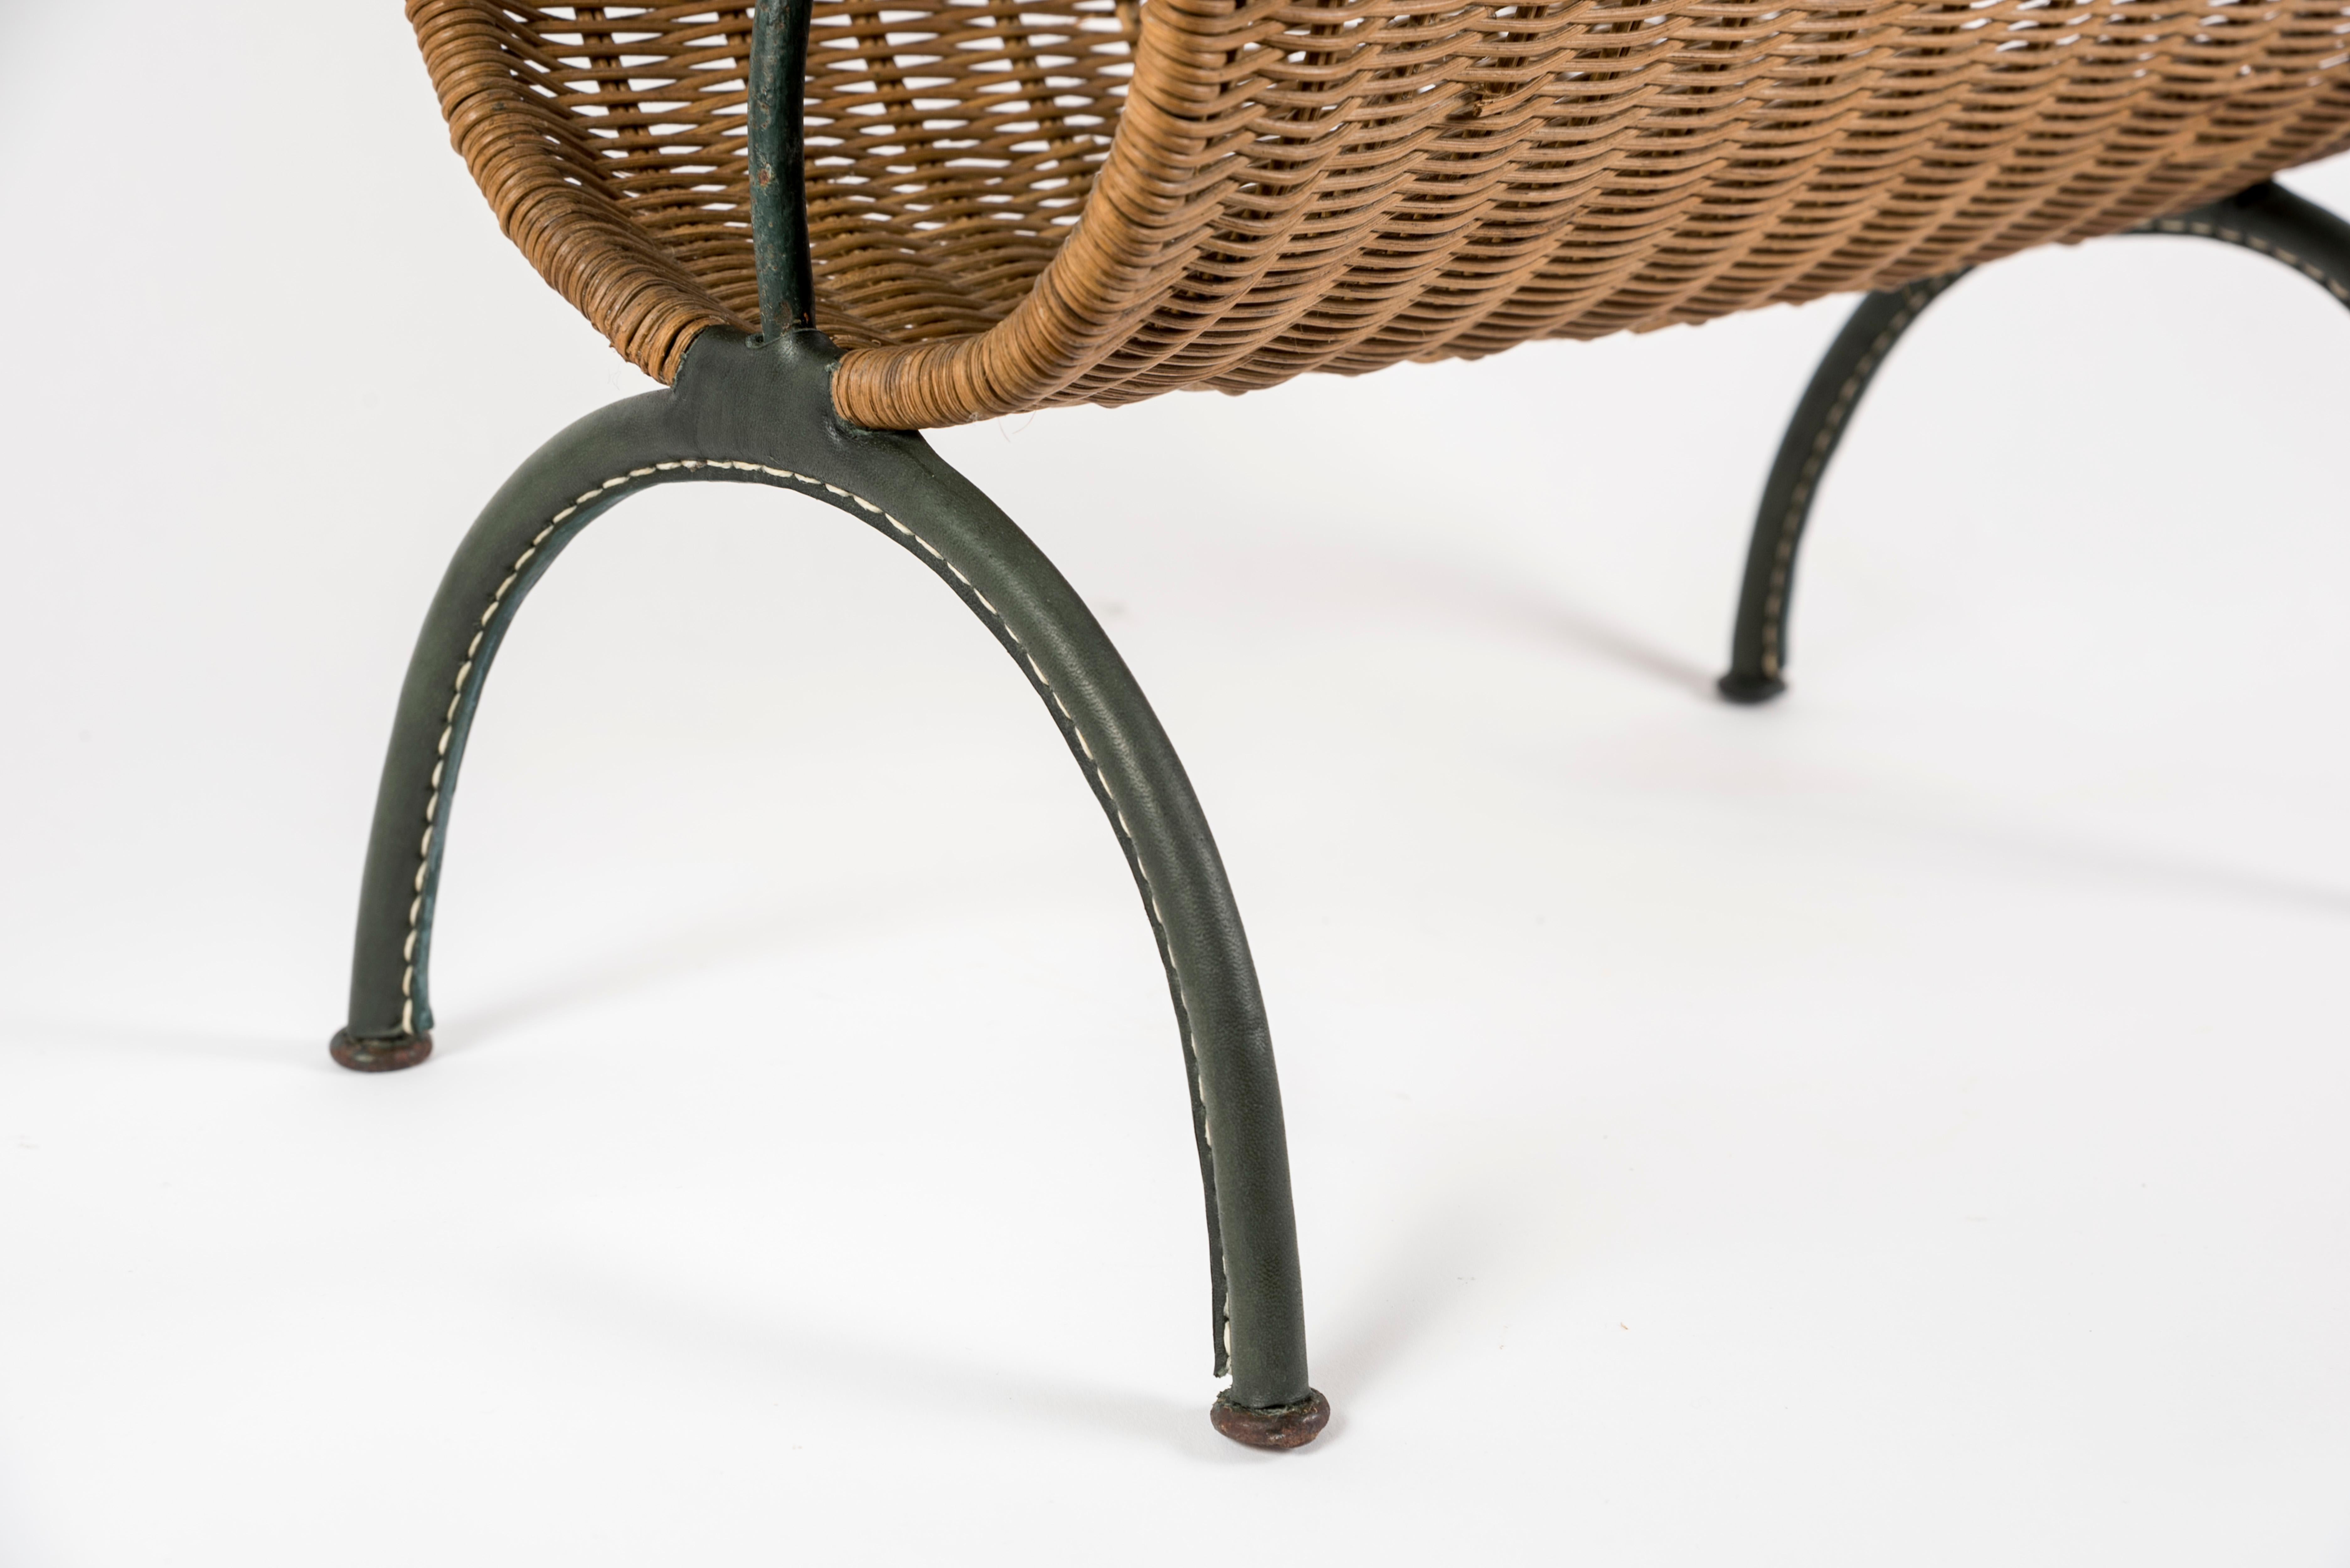 1950s rattan and stitched leather magazine rack by Jacques Adnet
France
Rare in green.